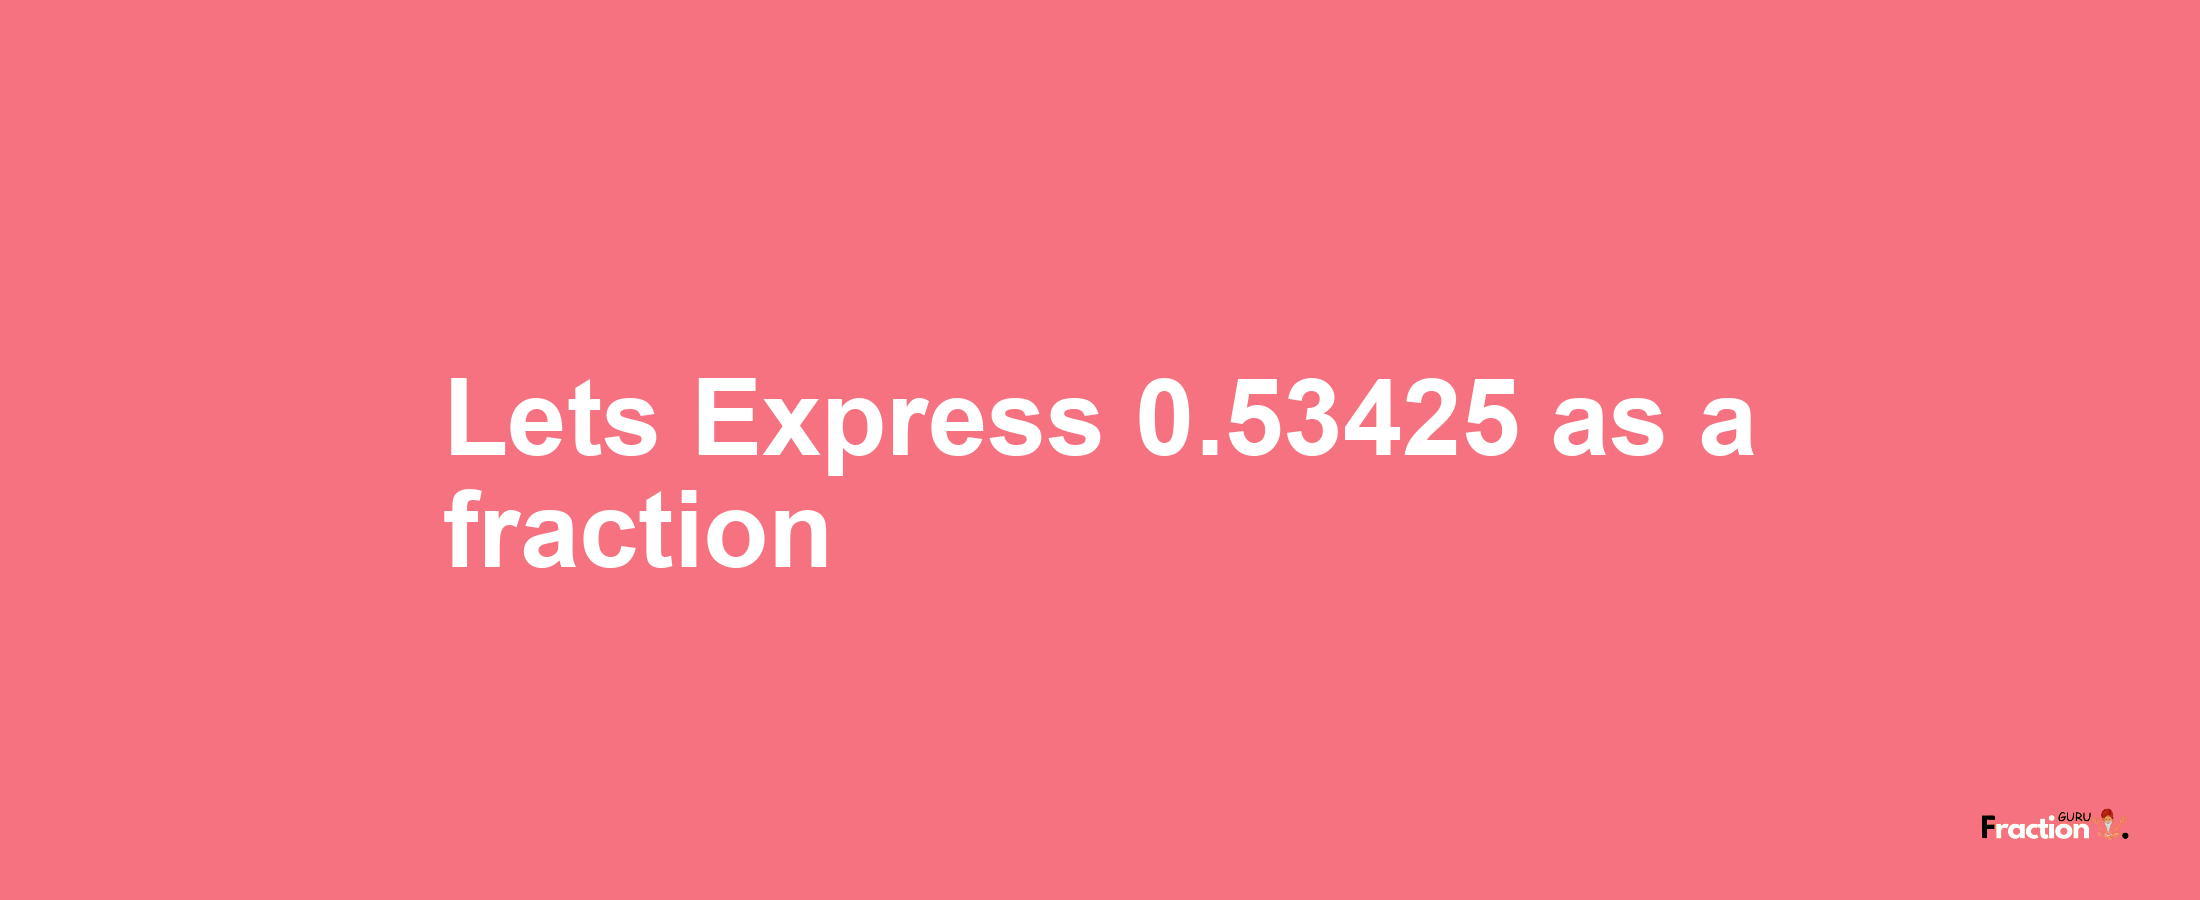 Lets Express 0.53425 as afraction